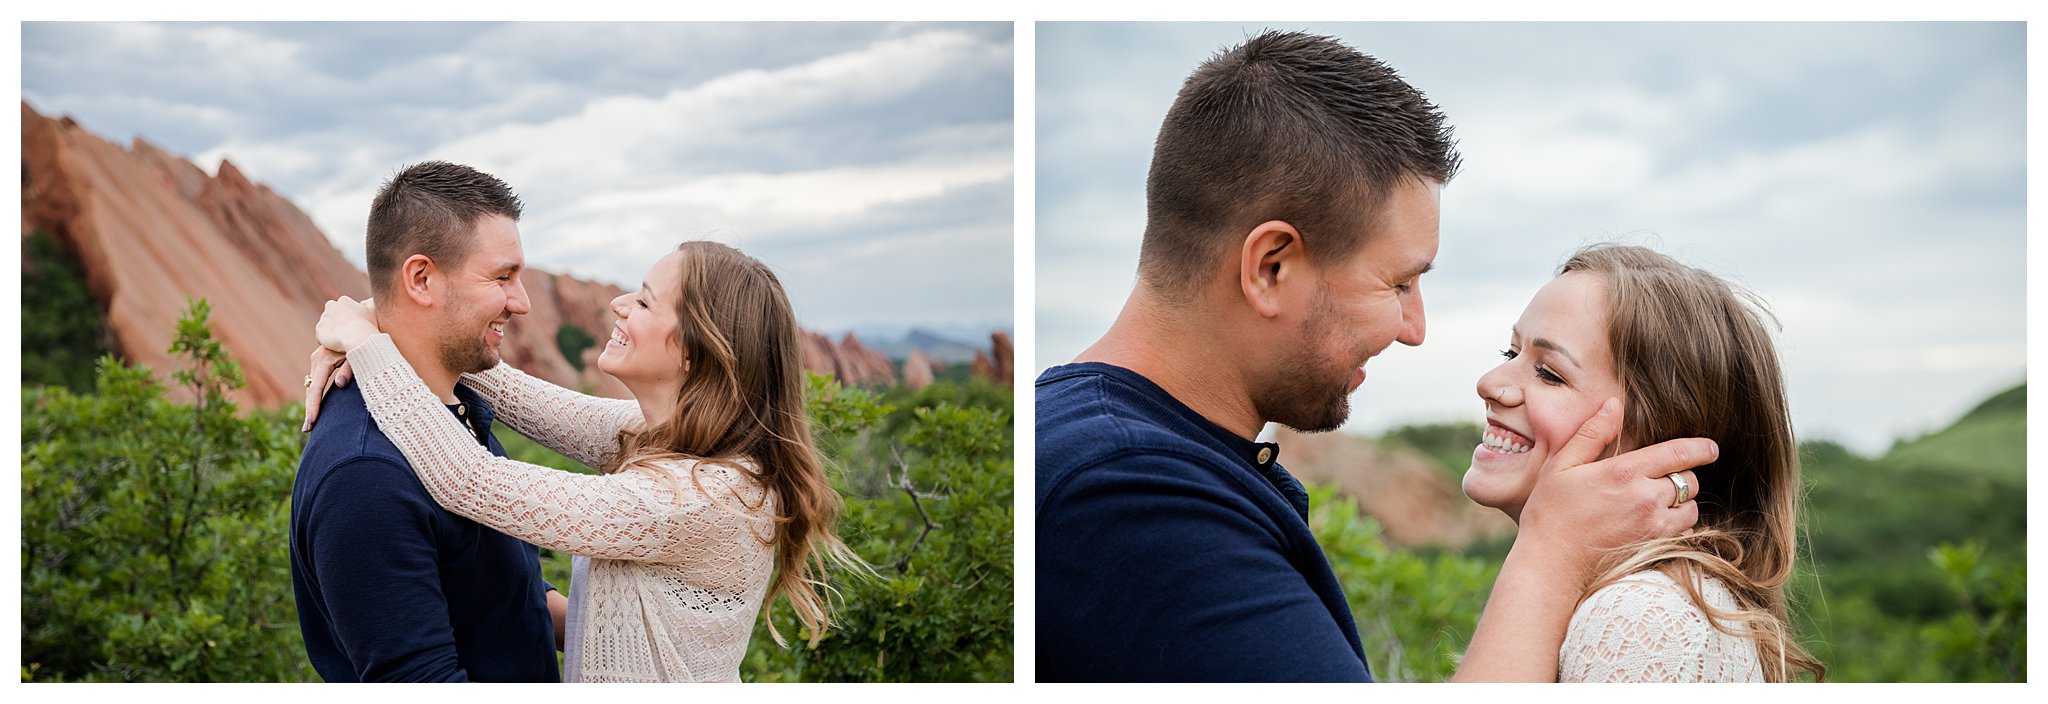 Couple poses for engagement session in front of lush green trees and red rocks